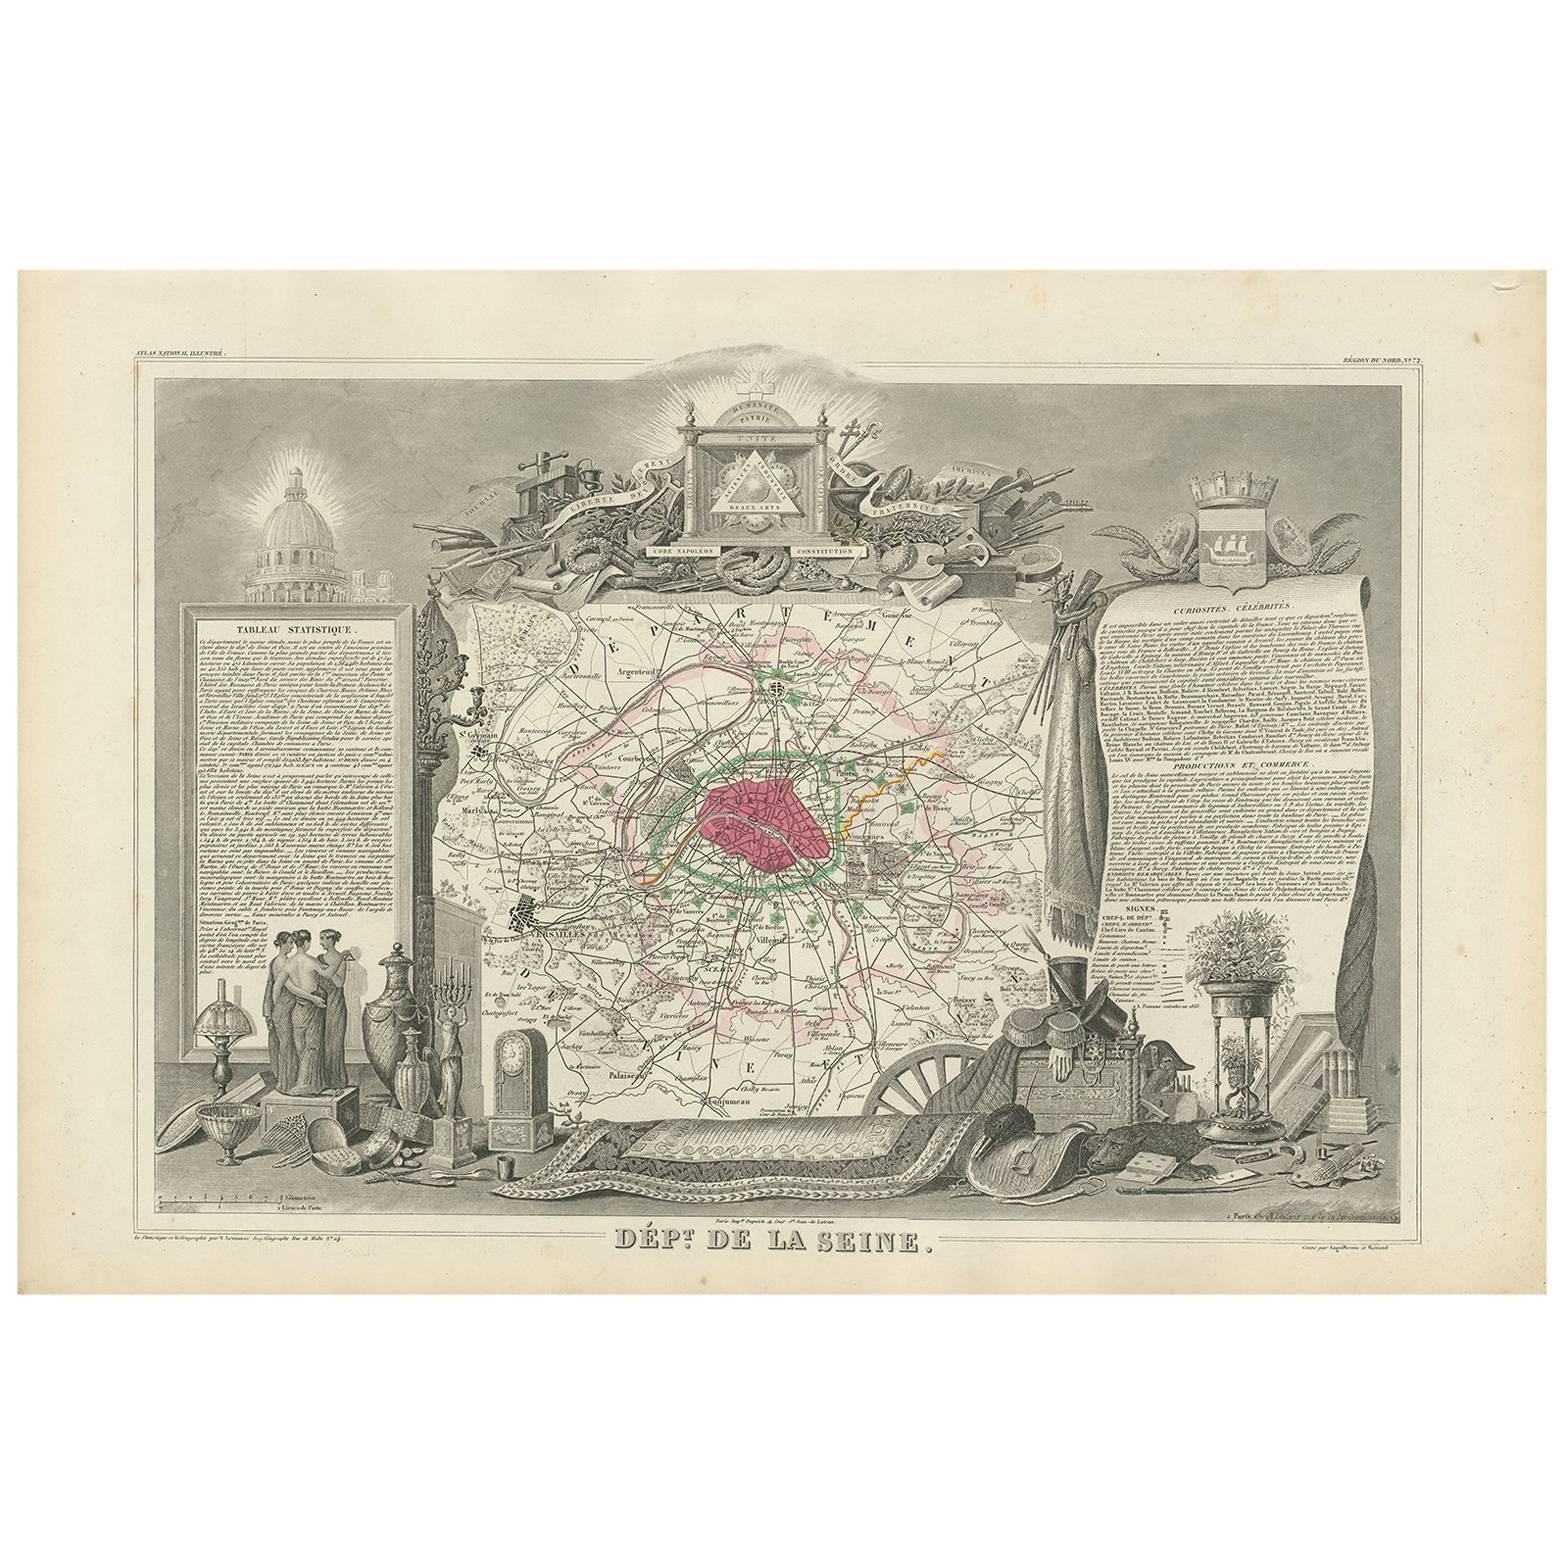 Decorative Antique Map of the Seine River and Paris in France, ca.1854